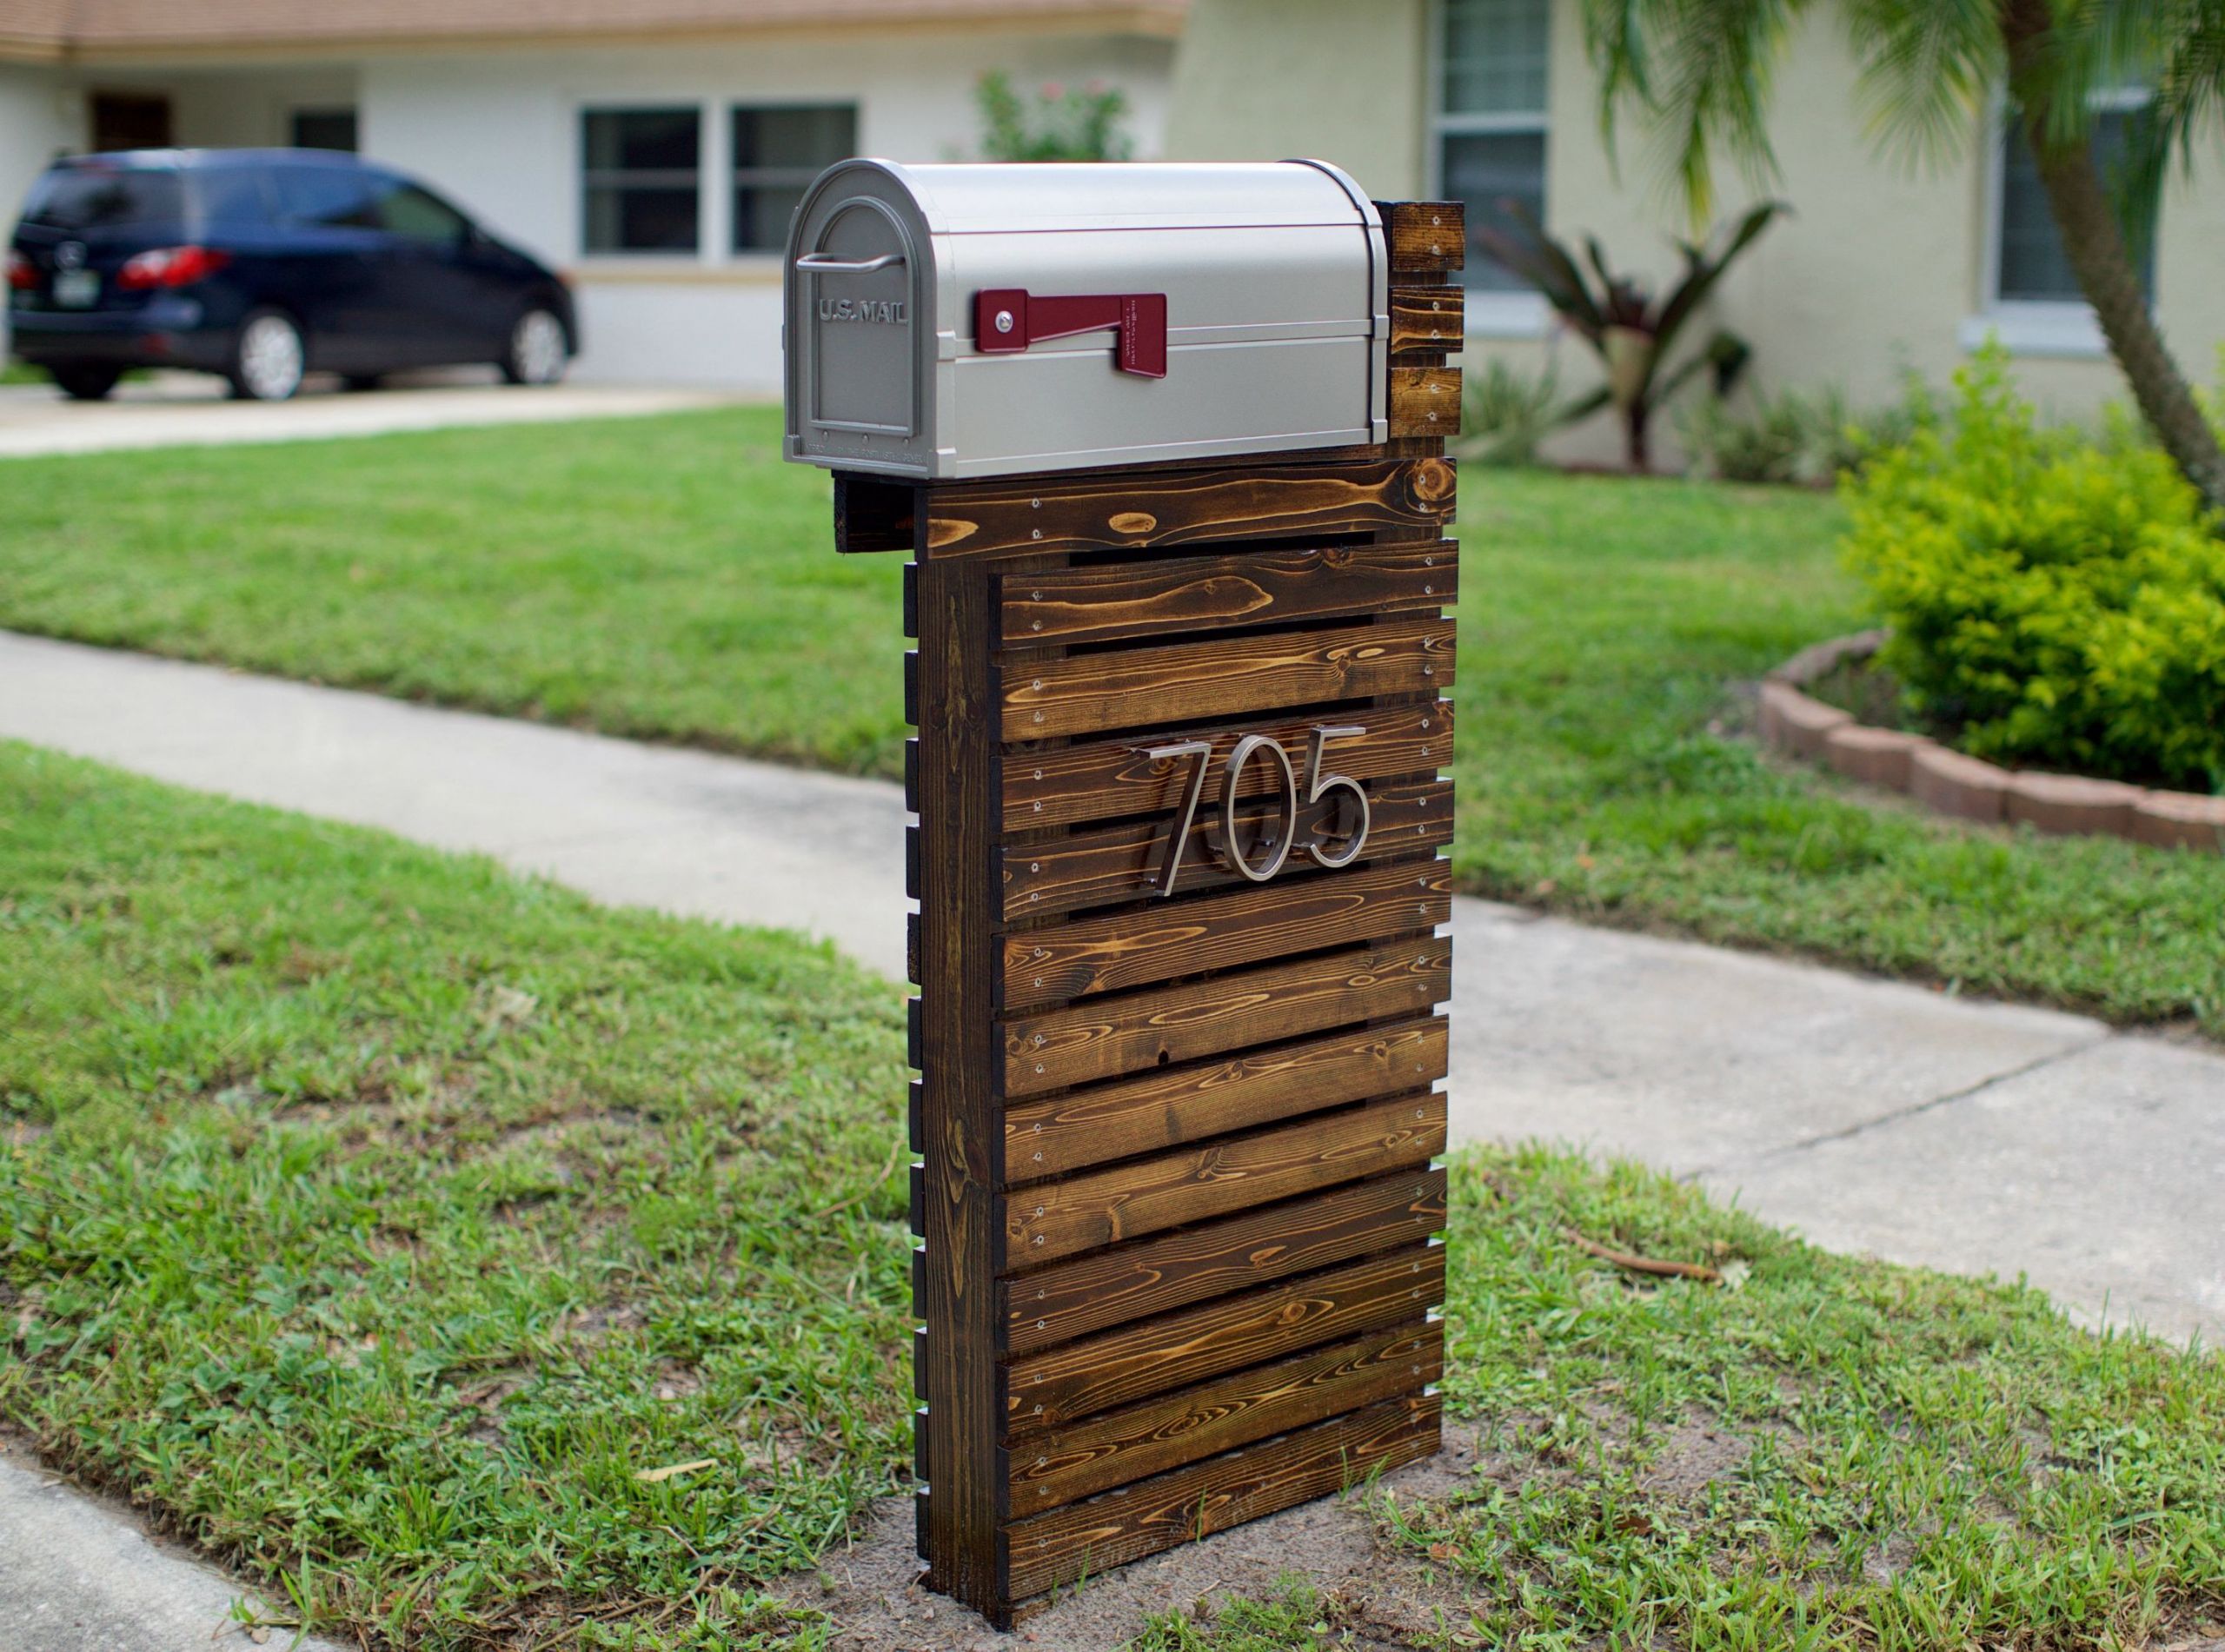 DIY Mailbox Post Ideas
 They Revamped Their Boring Mailbox Into A Traffic Stopping